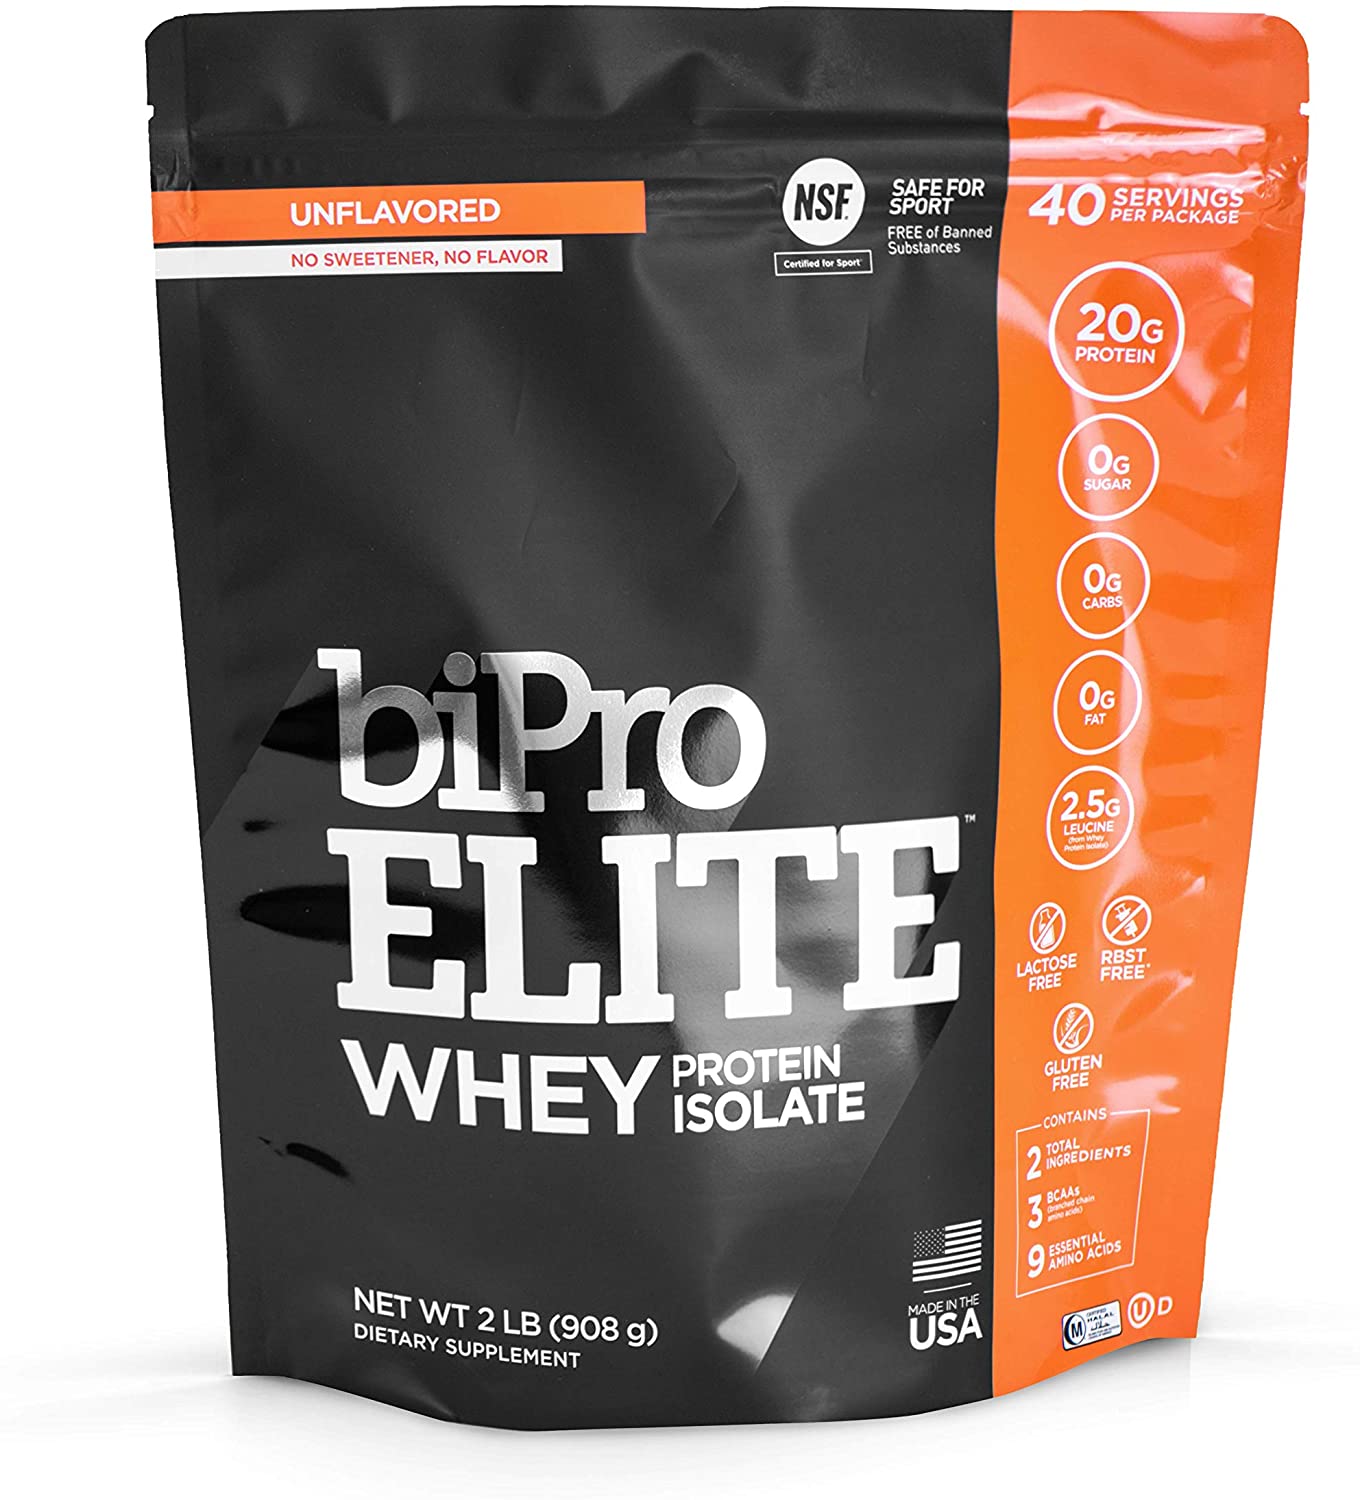 BiPro Elite 100% Whey Protein Powder Isolate for High-Intensity Fitness, Unflavored,